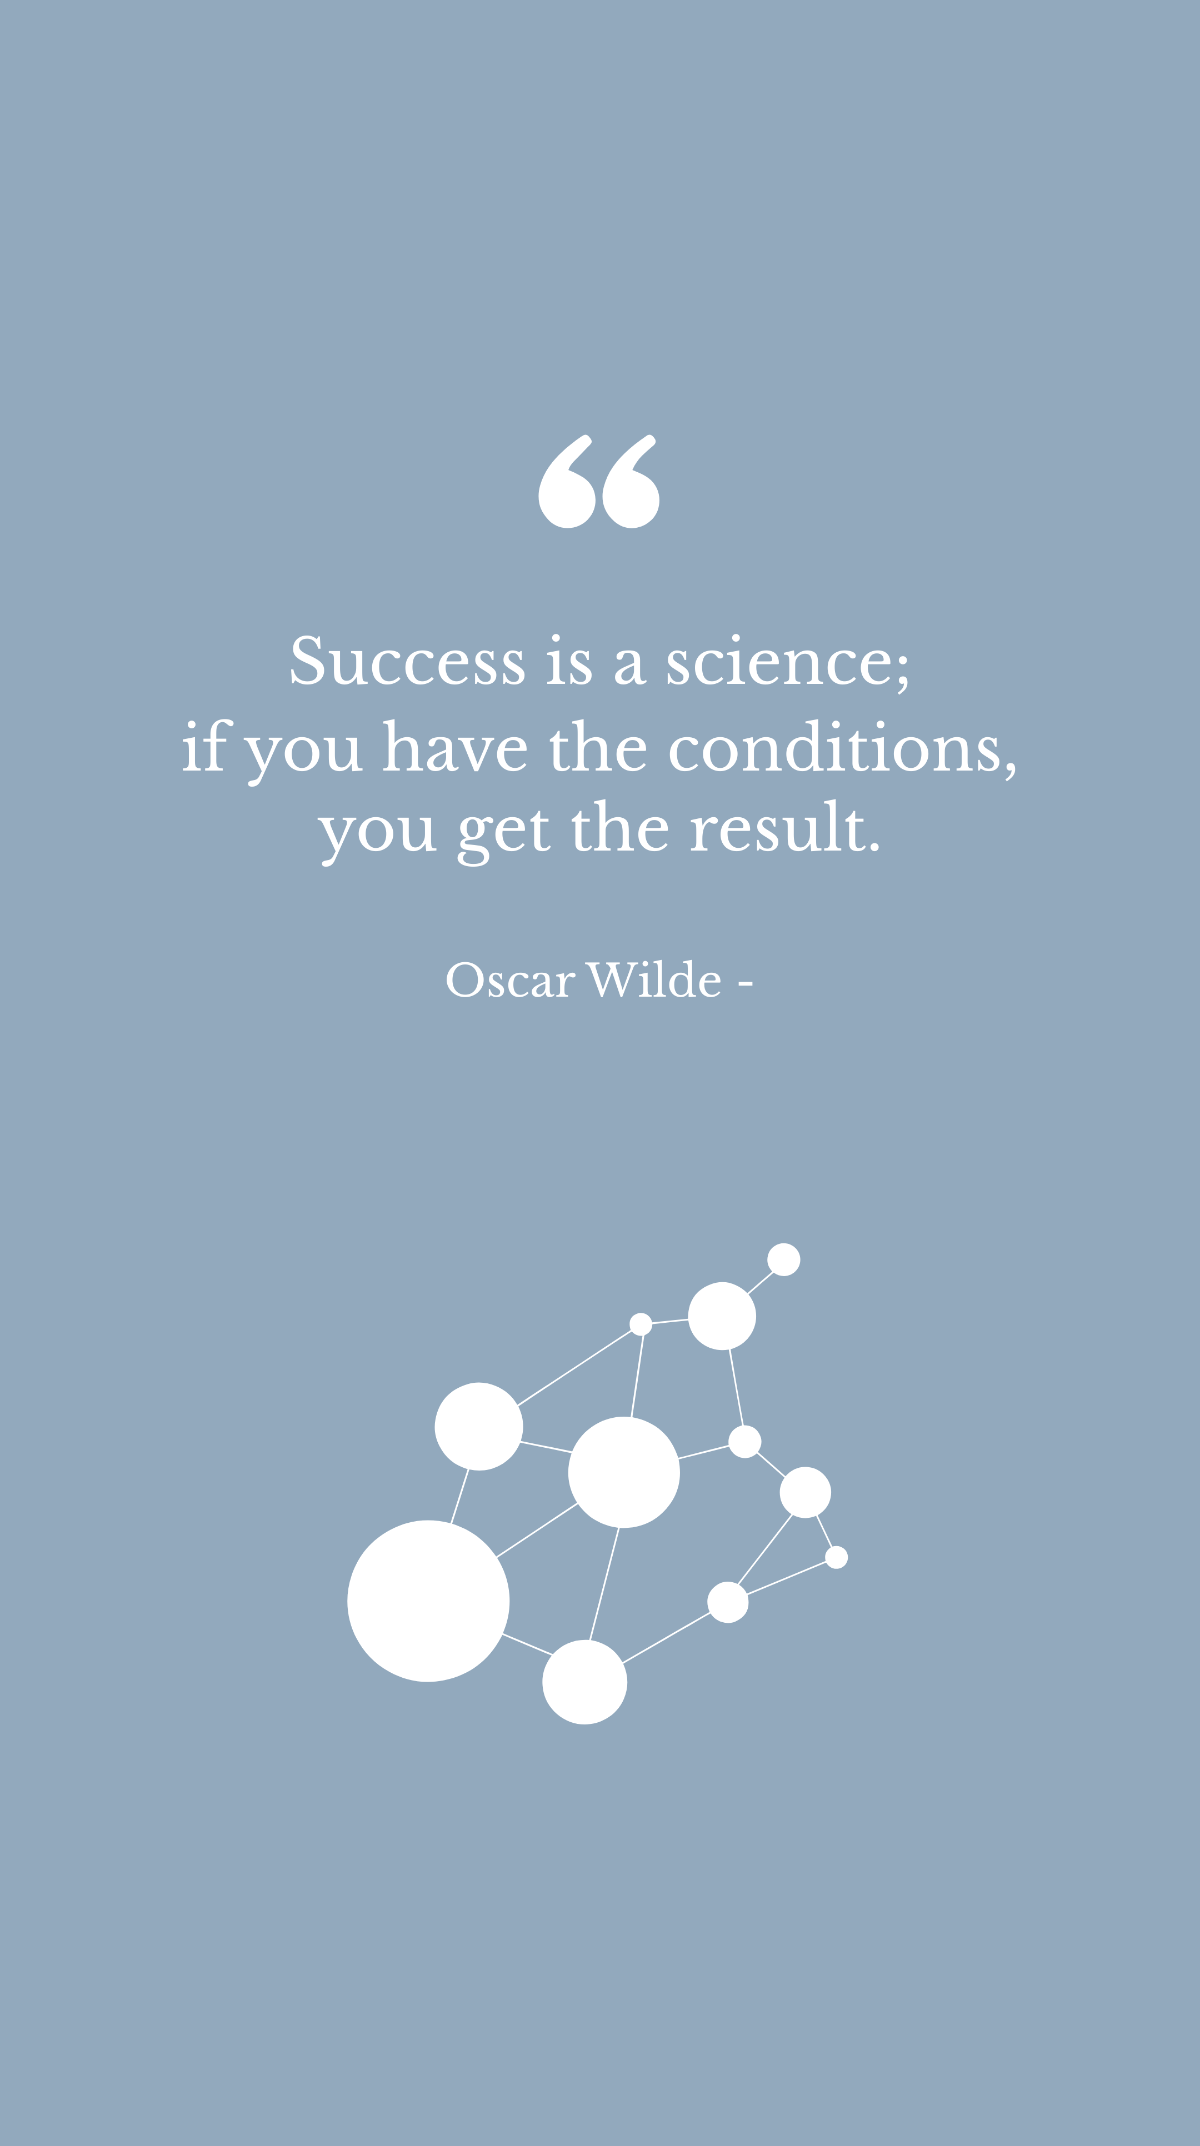 Oscar Wilde - Success is a science; if you have the conditions, you get the result.